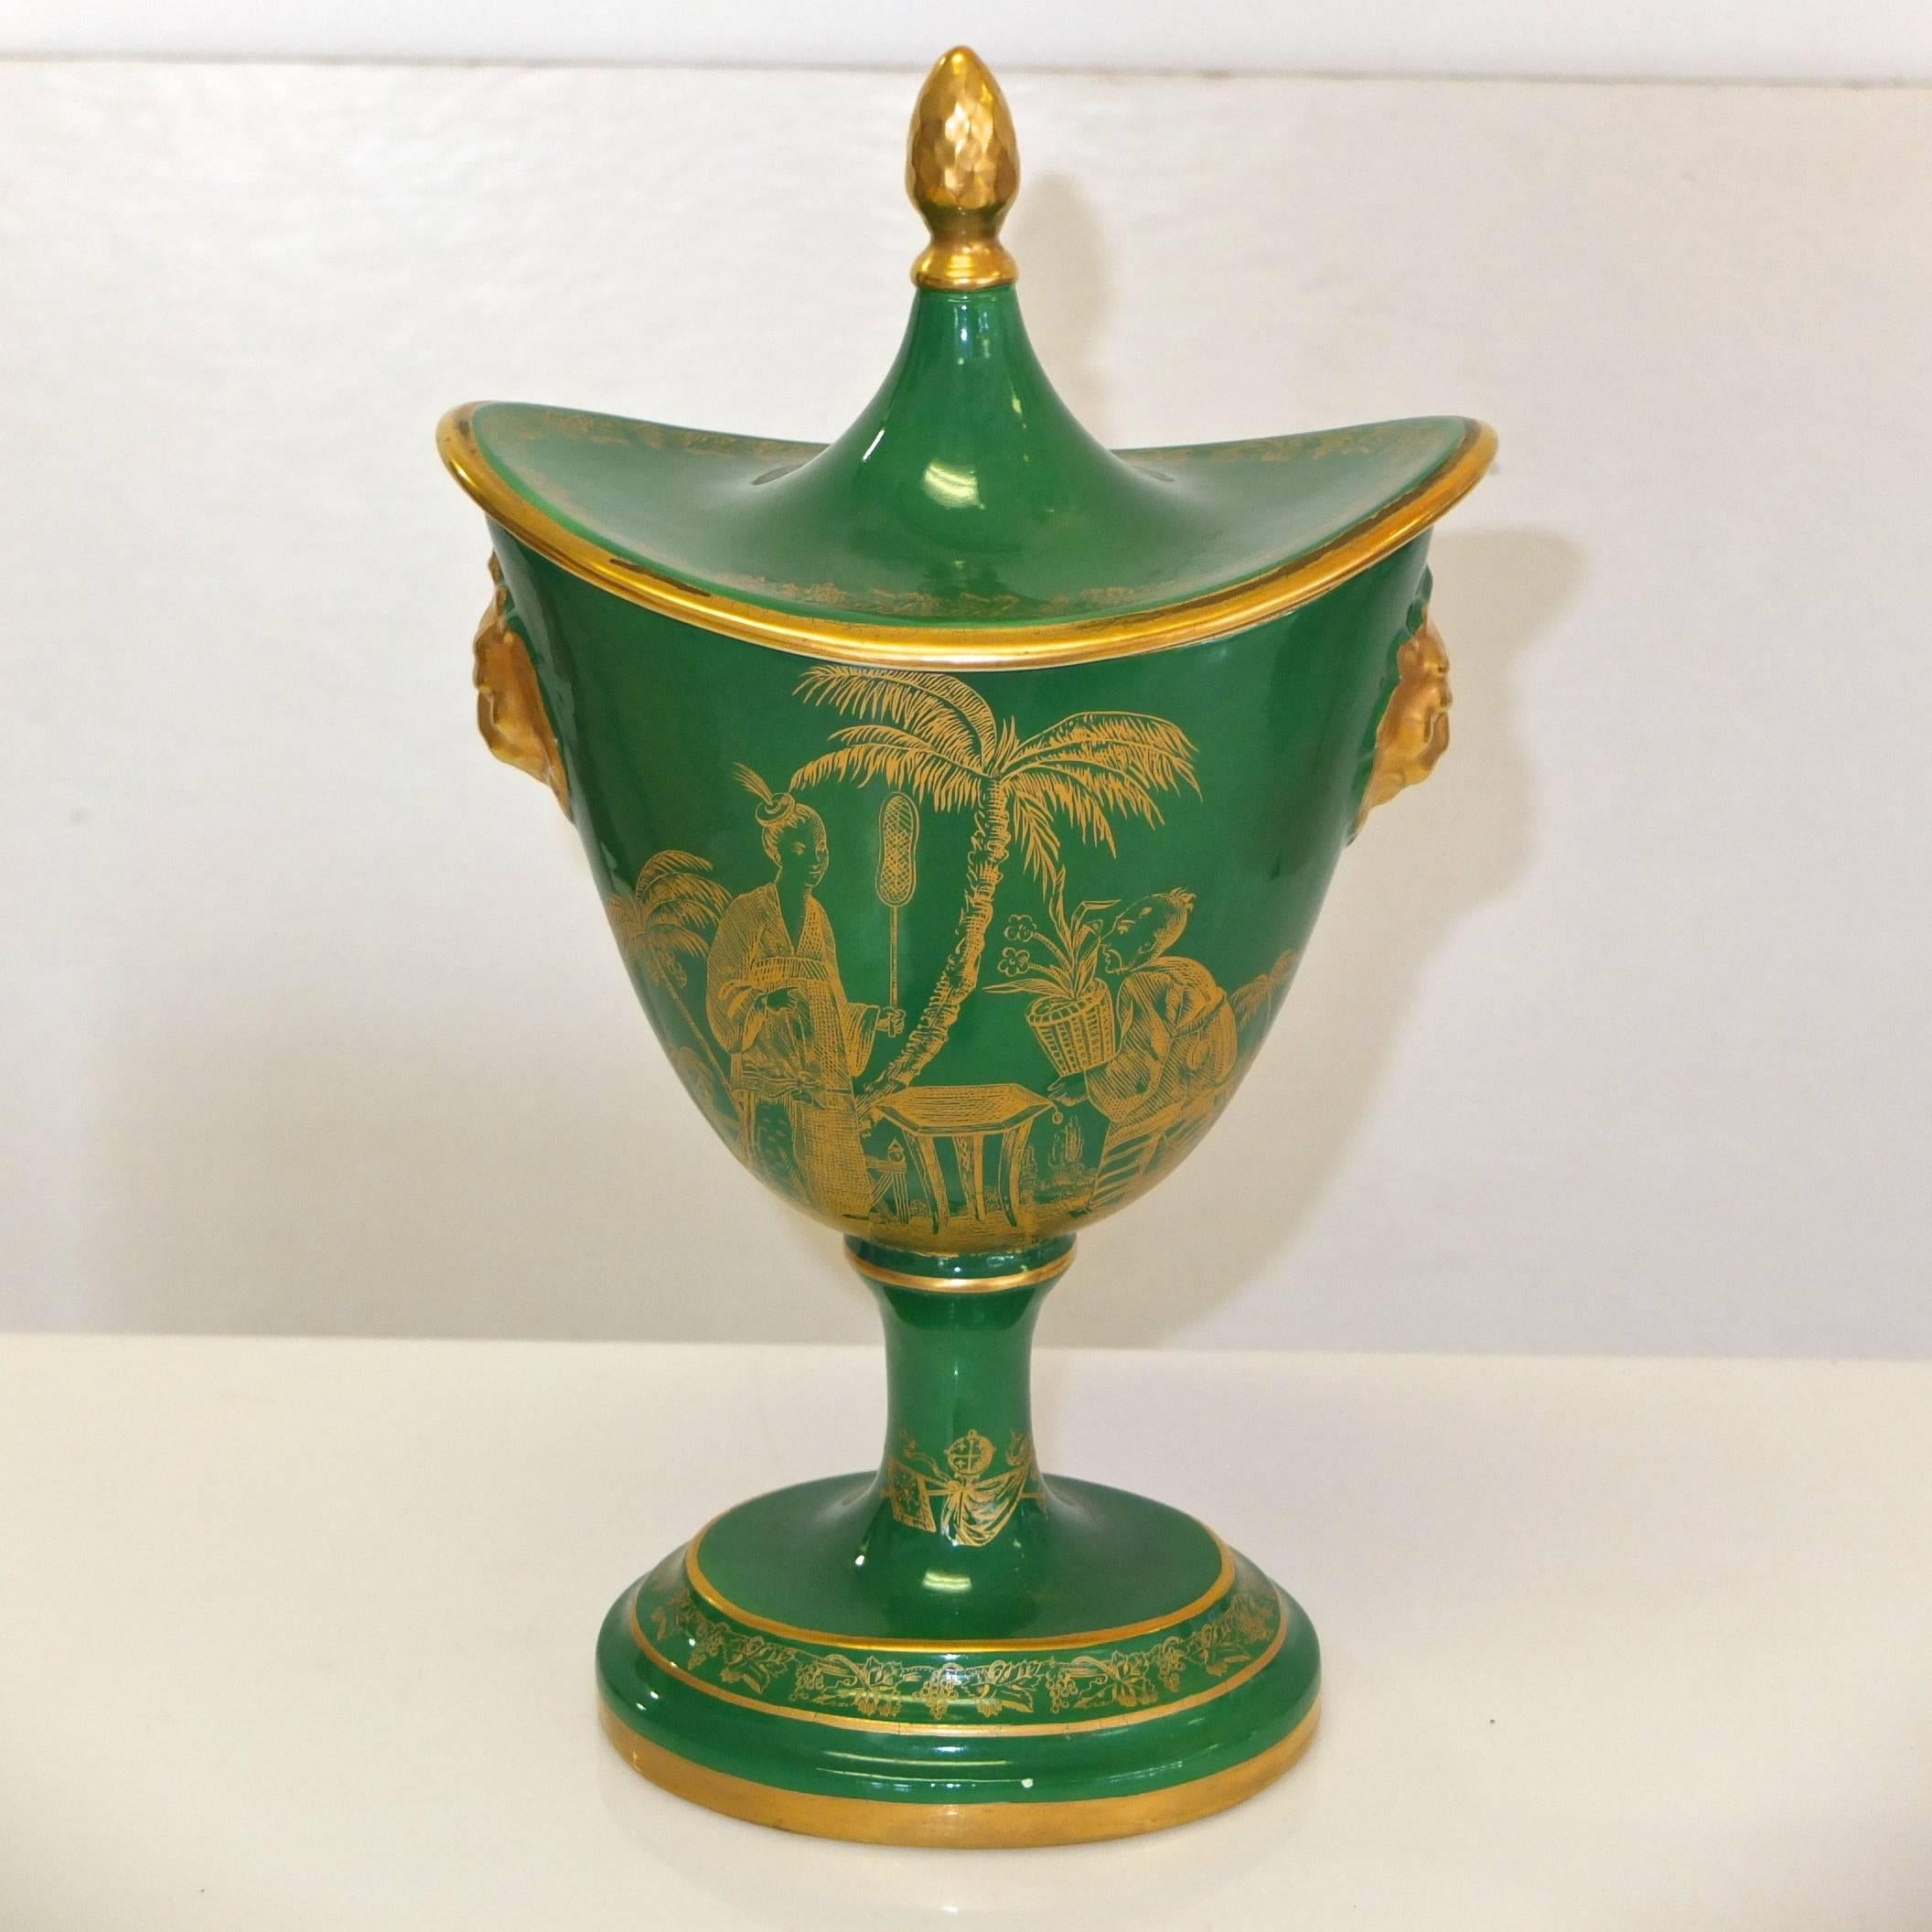 Lidded cachepot made in Italy for the Mottahedeh company, known for their luxury ceramic antique reproductions and historic designs. Gold transfer ware on green ground. Orientalist scene with figures. Lid with gold finial and rim. Gold lions on left